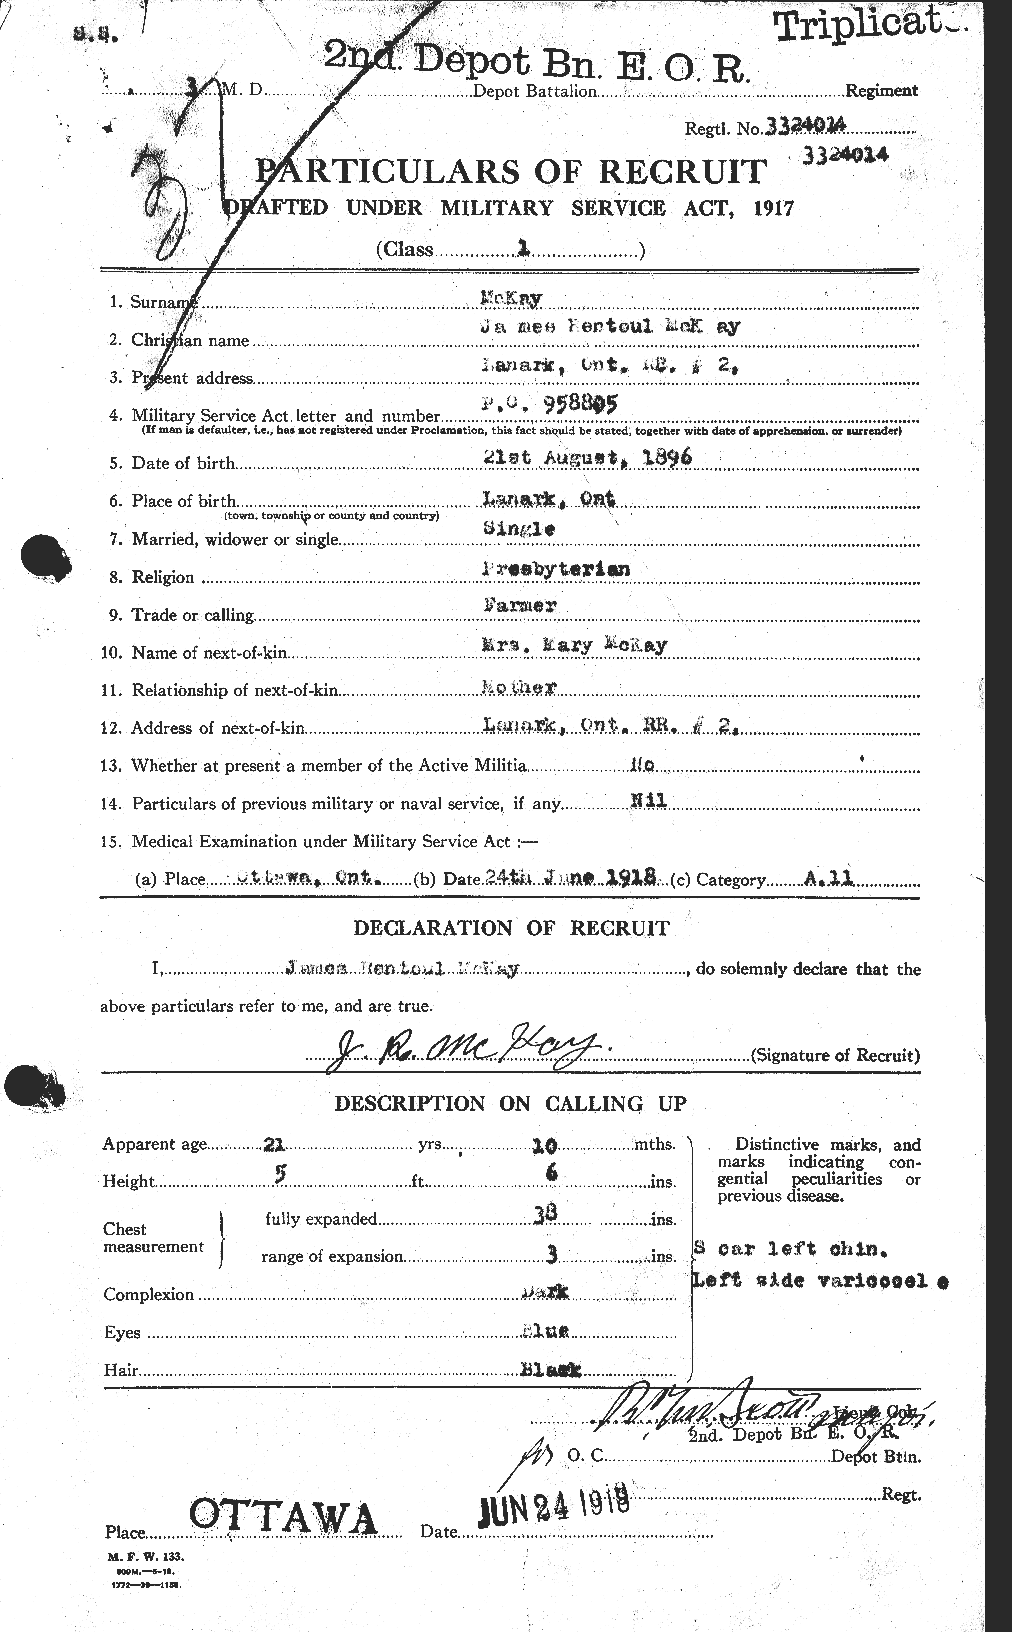 Personnel Records of the First World War - CEF 526940a